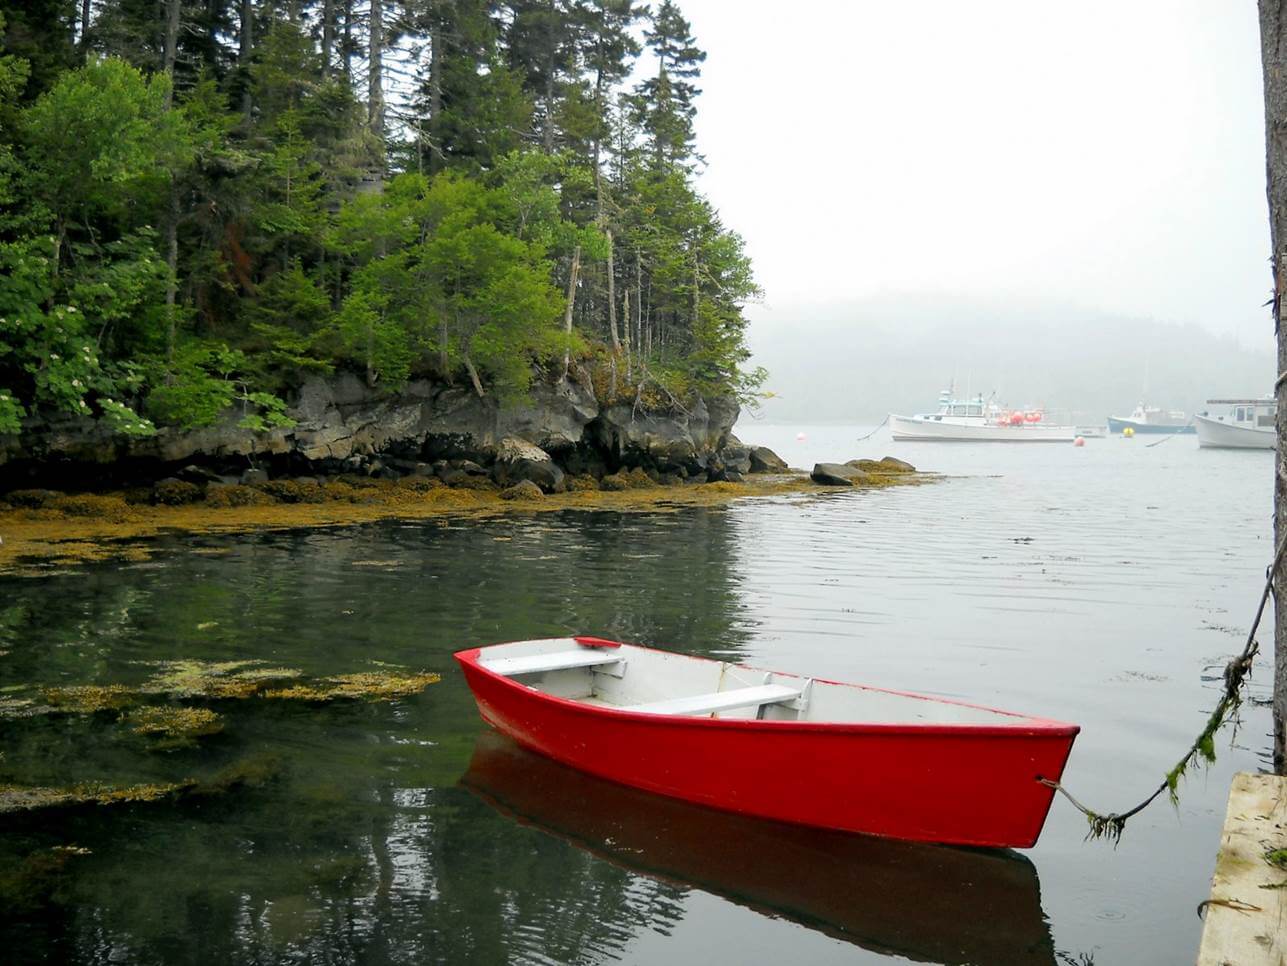 Red rowboat in a river that opens into a bay